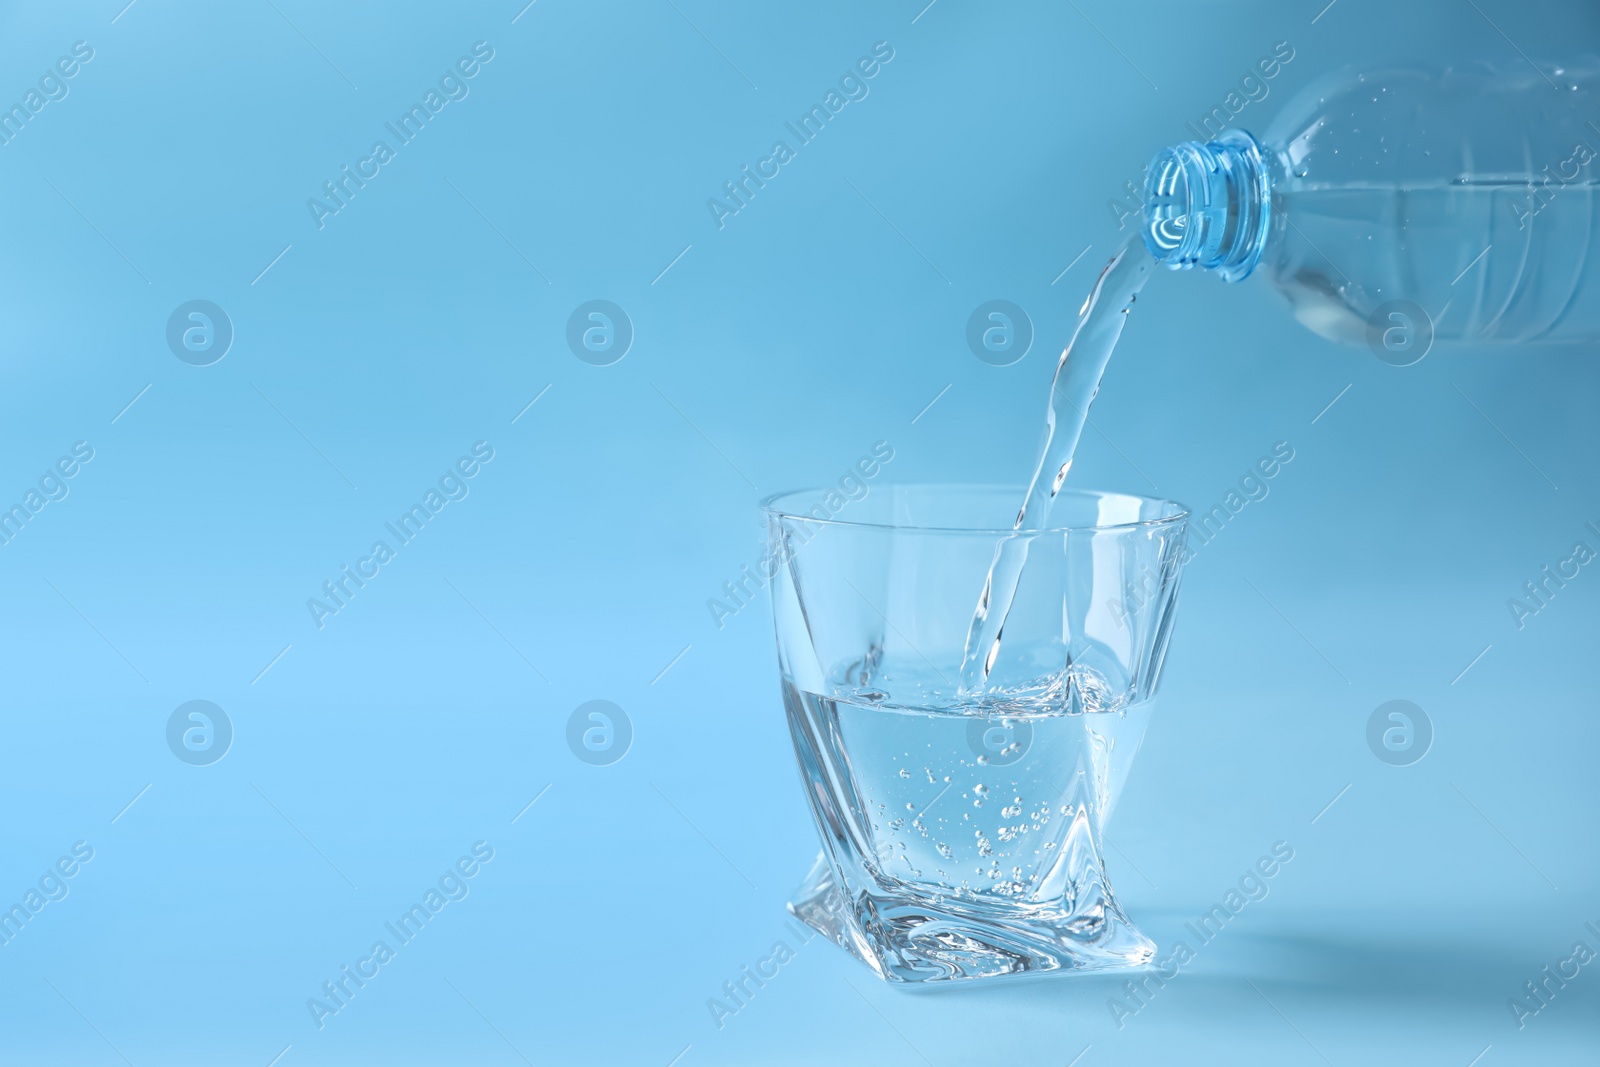 Photo of Pouring water from bottle into glass on light blue background. Space for text